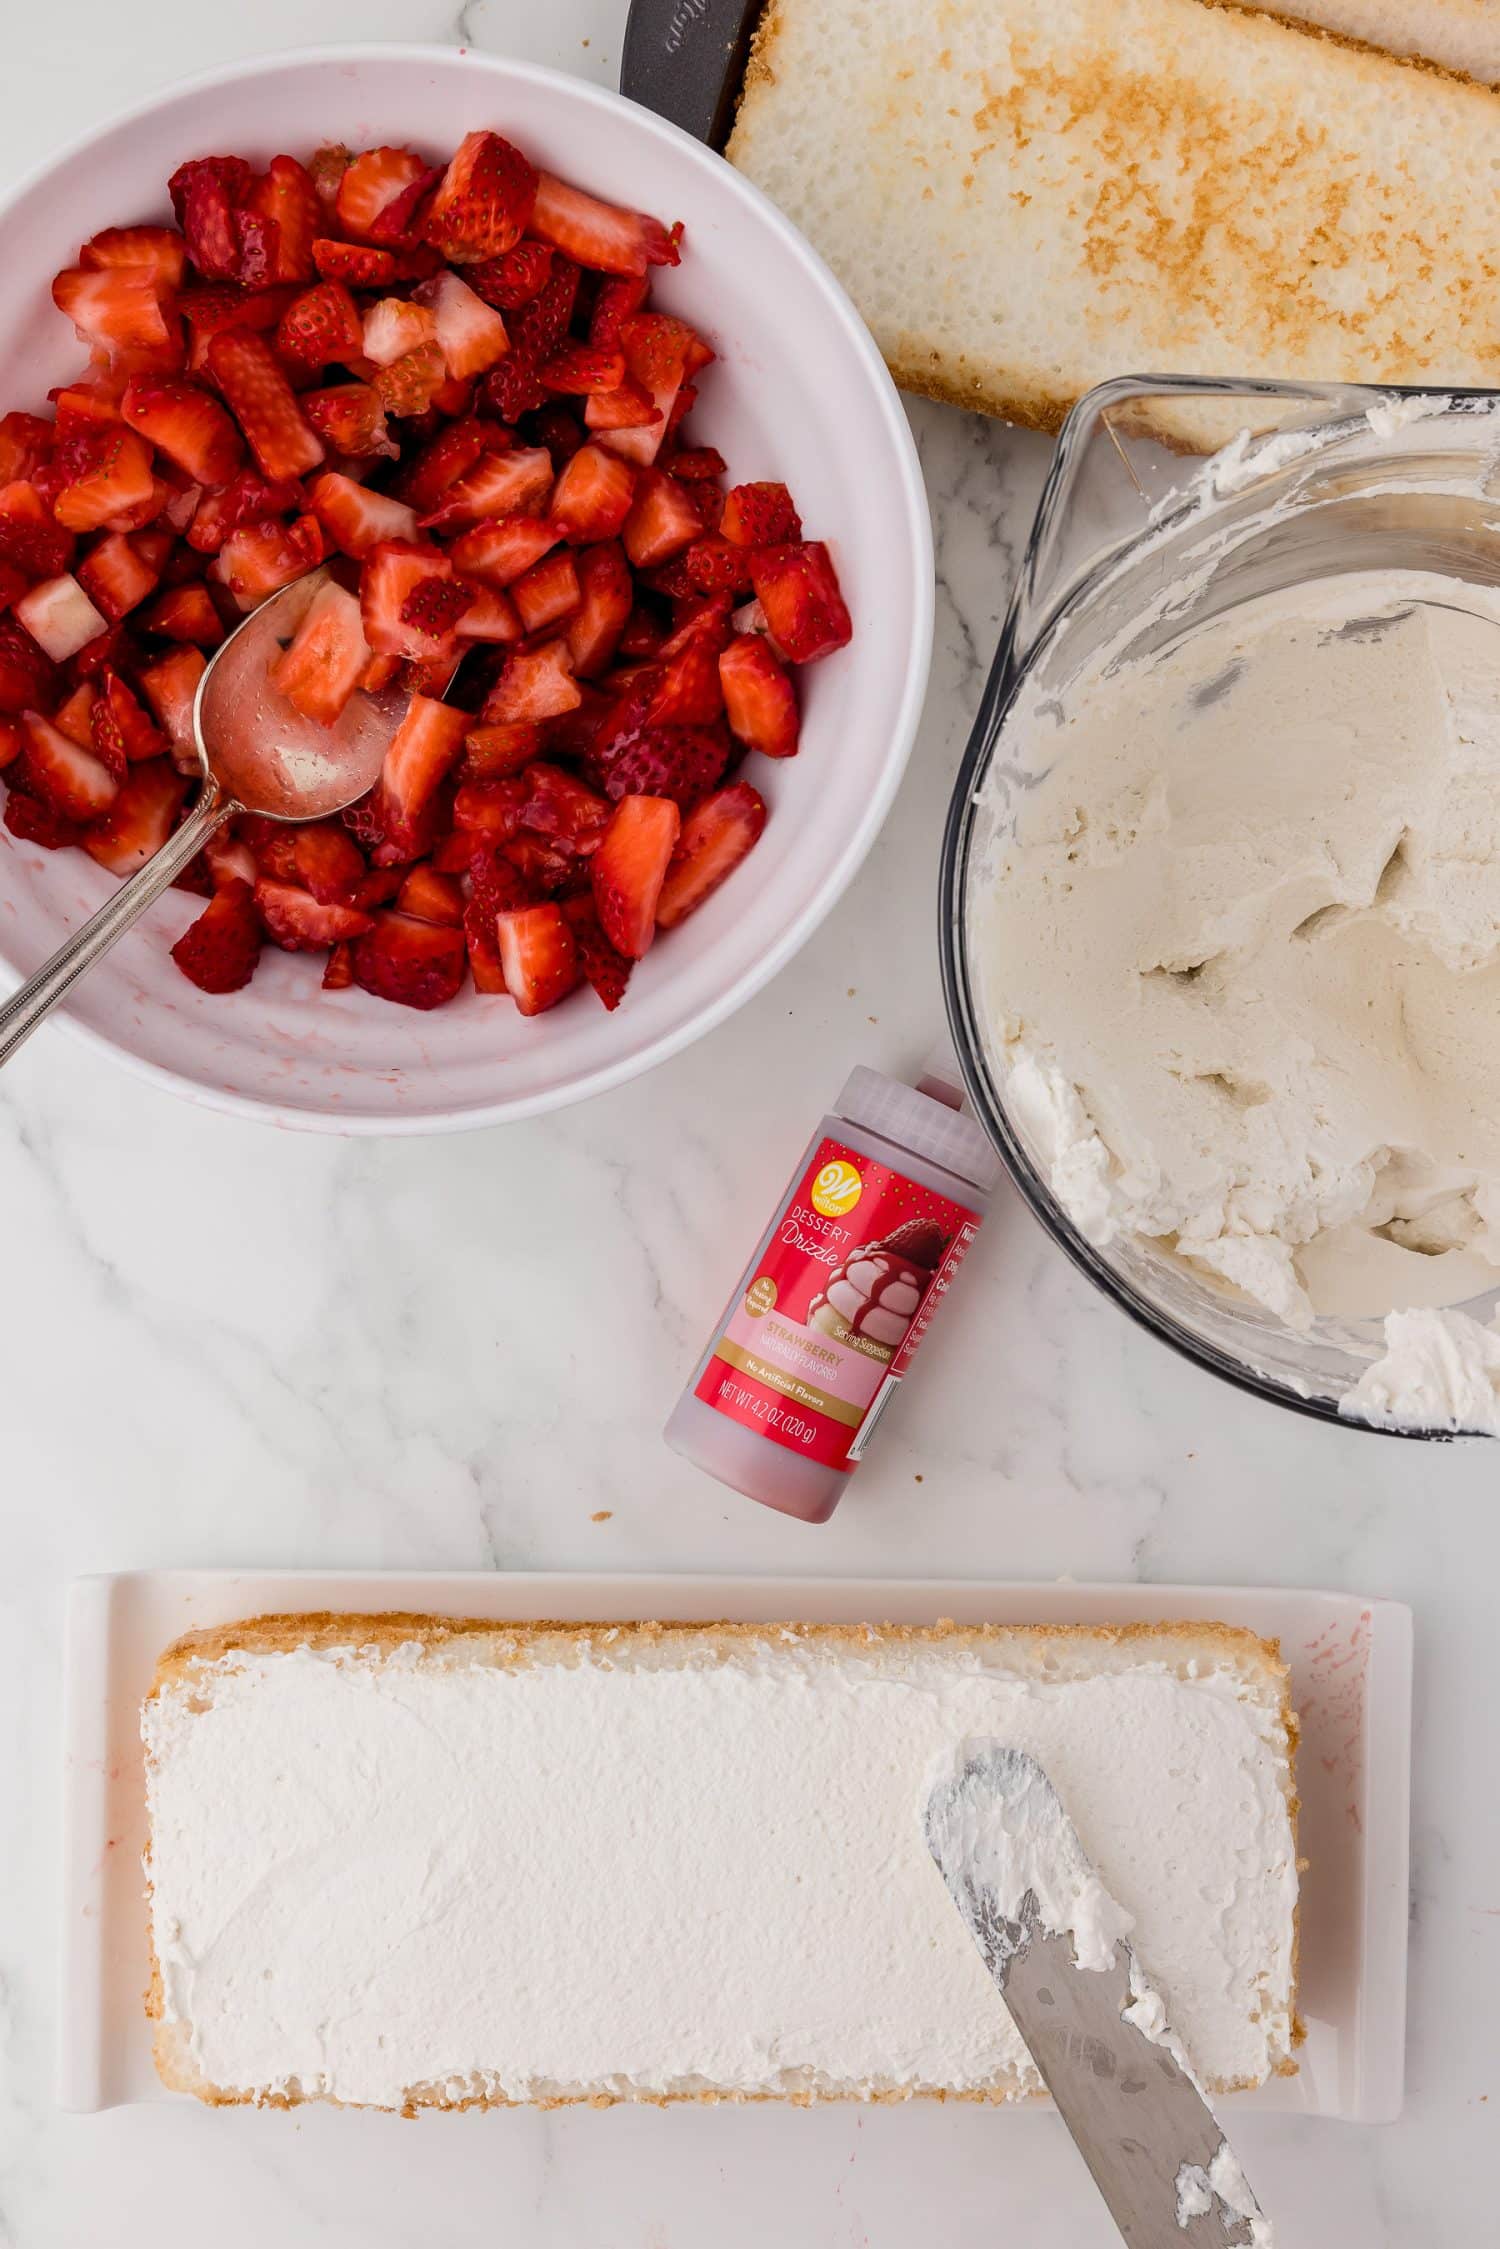 spreading whipped cream on a layer of angel food cake, bowl of strawberries, bowl of whipped cream and Wilton strawberry dessert drizzle on a white marble countertop